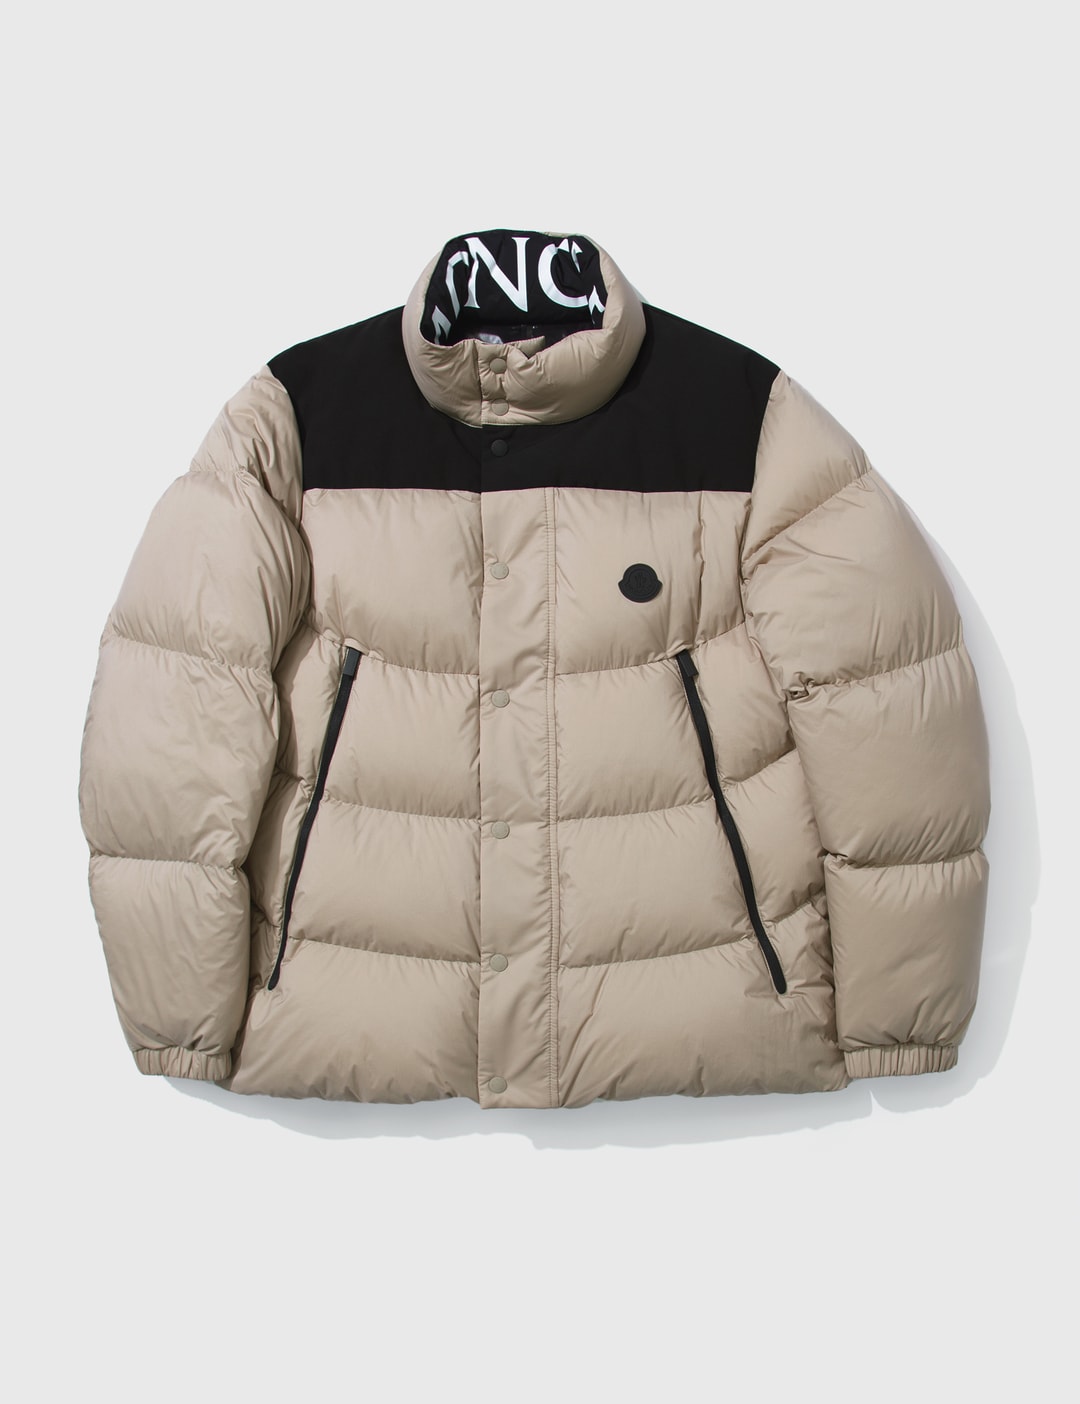 Moncler - Timsit Jacket | HBX - Globally Curated Fashion and Lifestyle ...